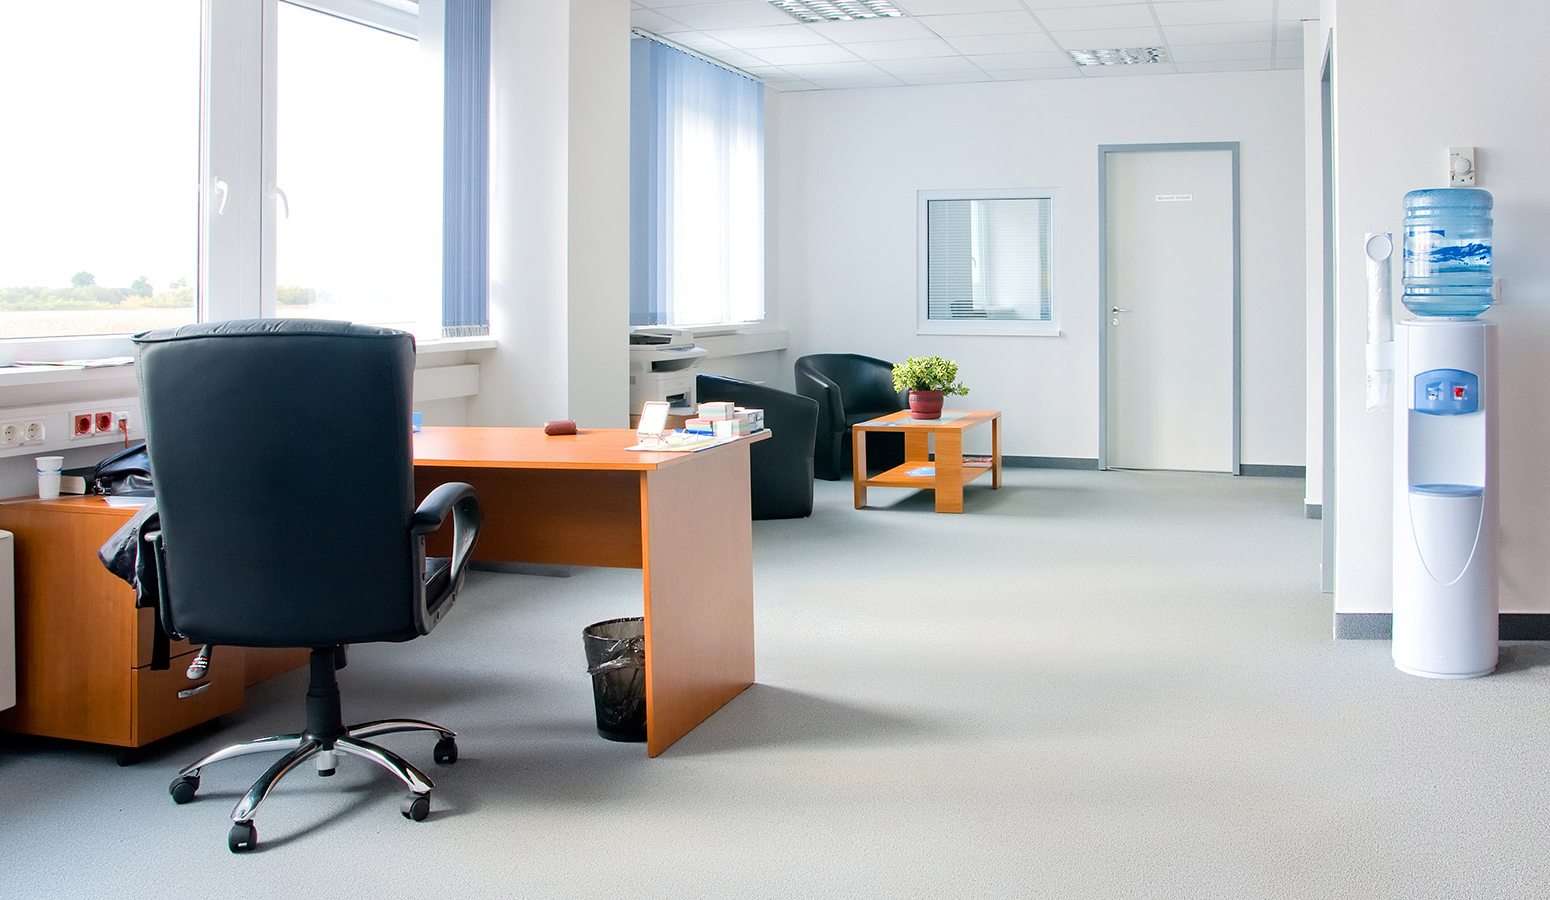 commercial carpet cleaning services in Nashville, TN